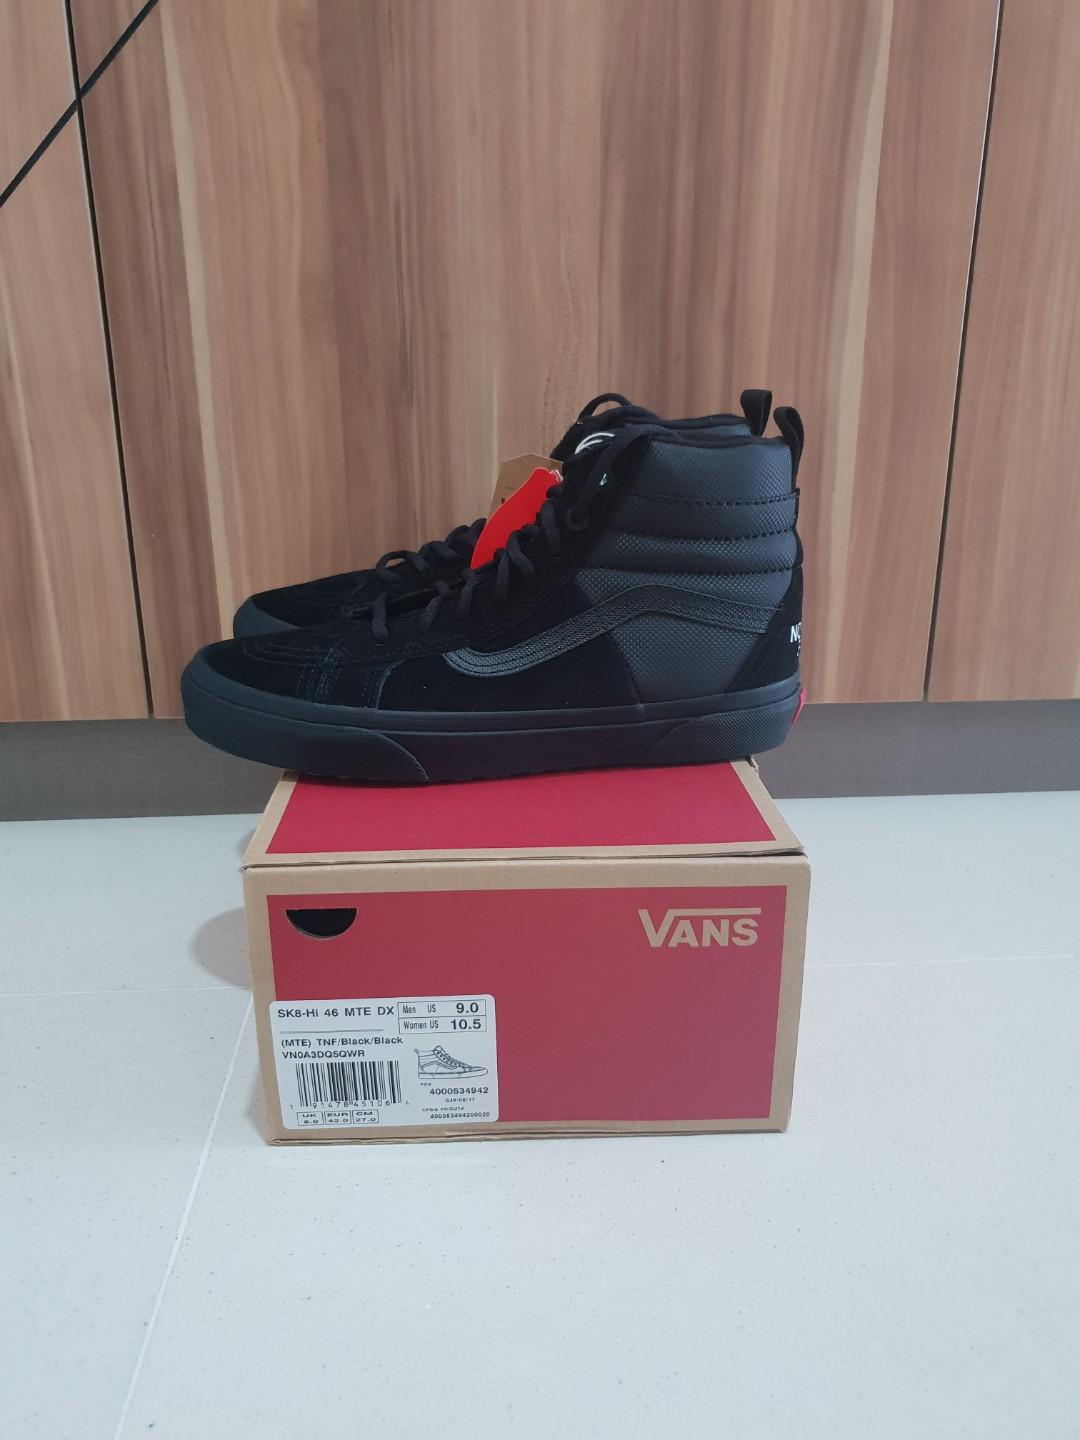 Vans x The North Face SK8 Hi 46 MTE DX US9, Everything Else on Carousell